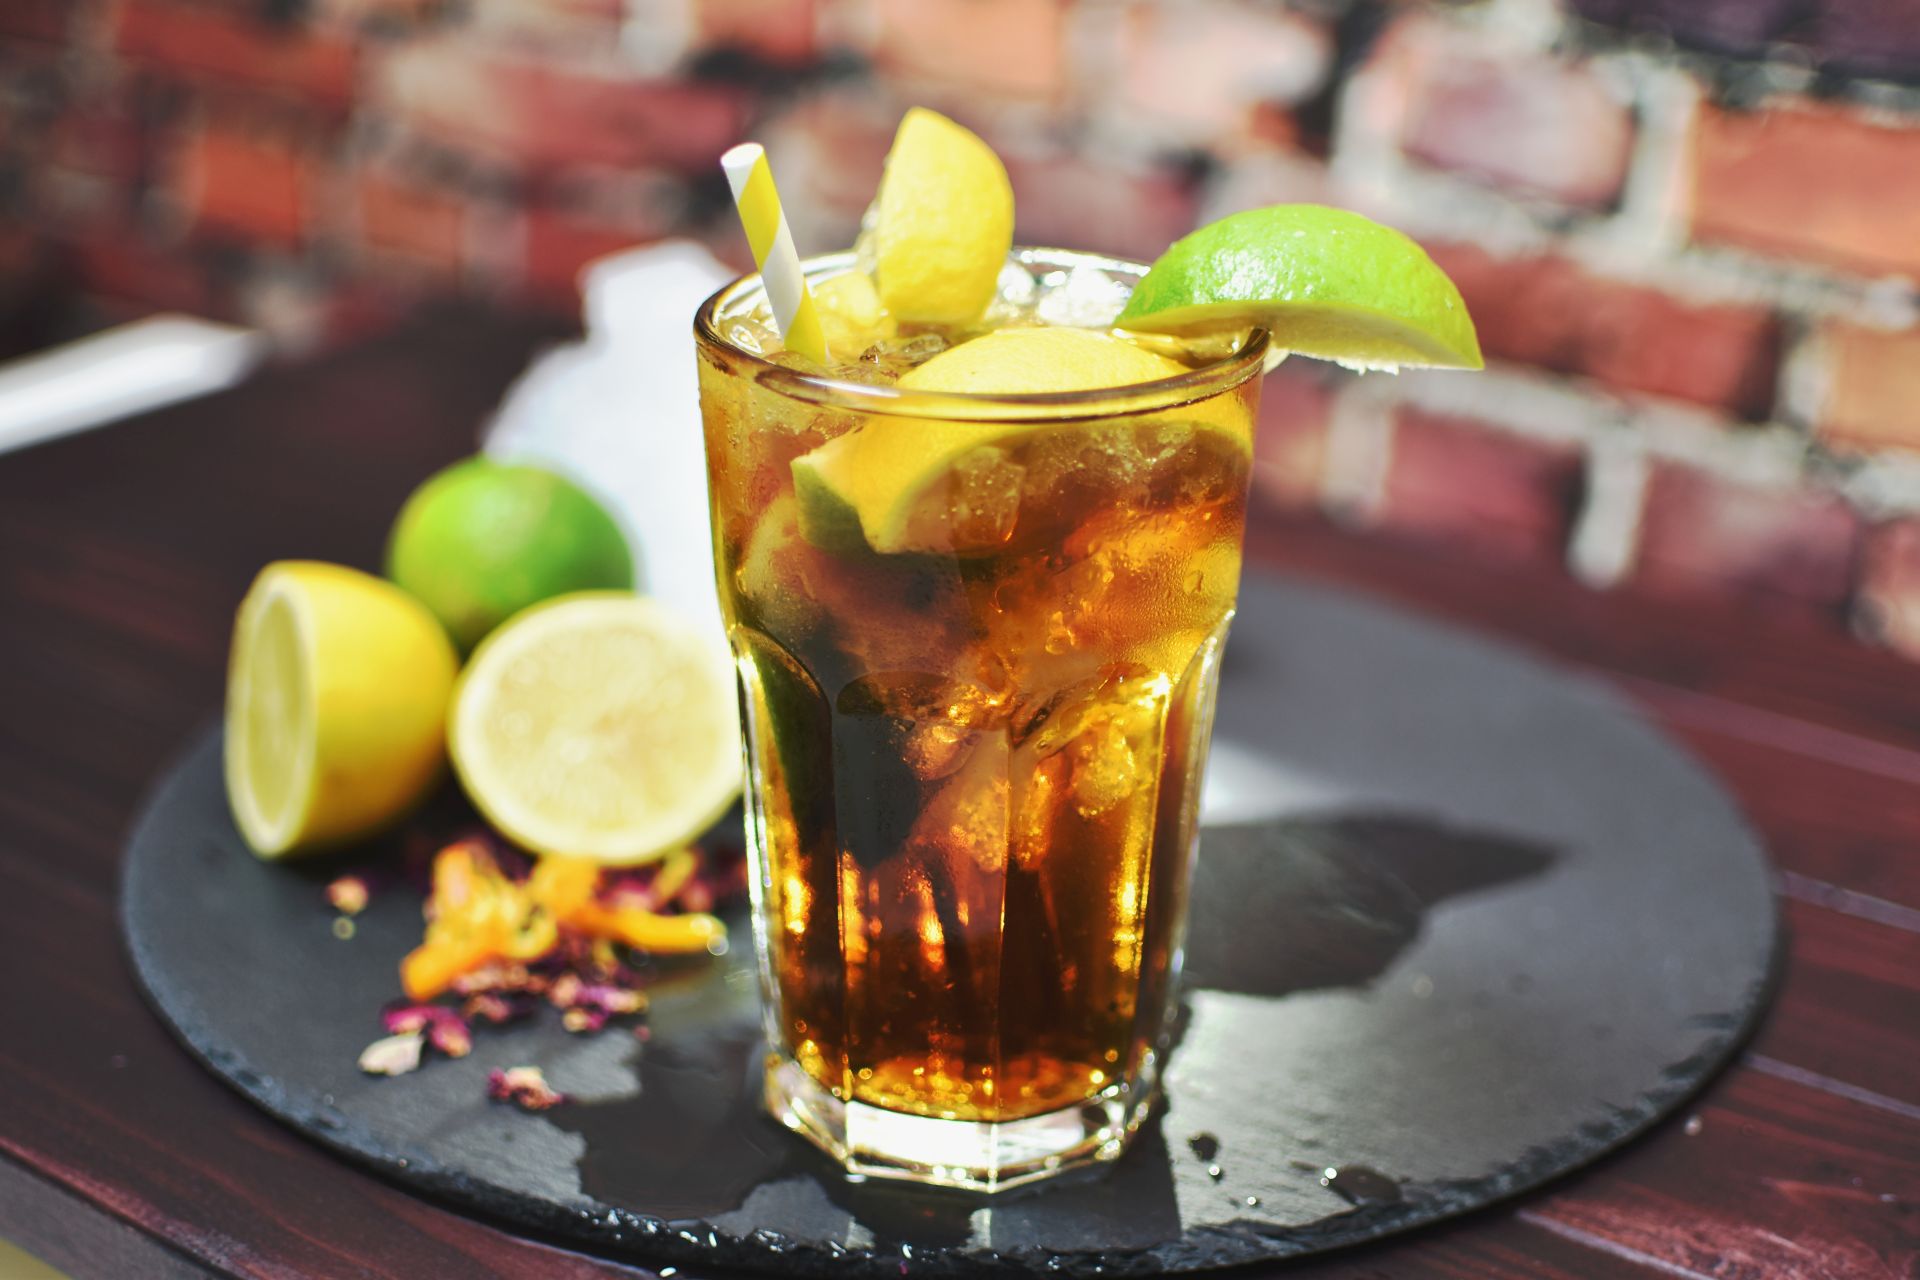 Long Island Iced Tea Recipe and Variations